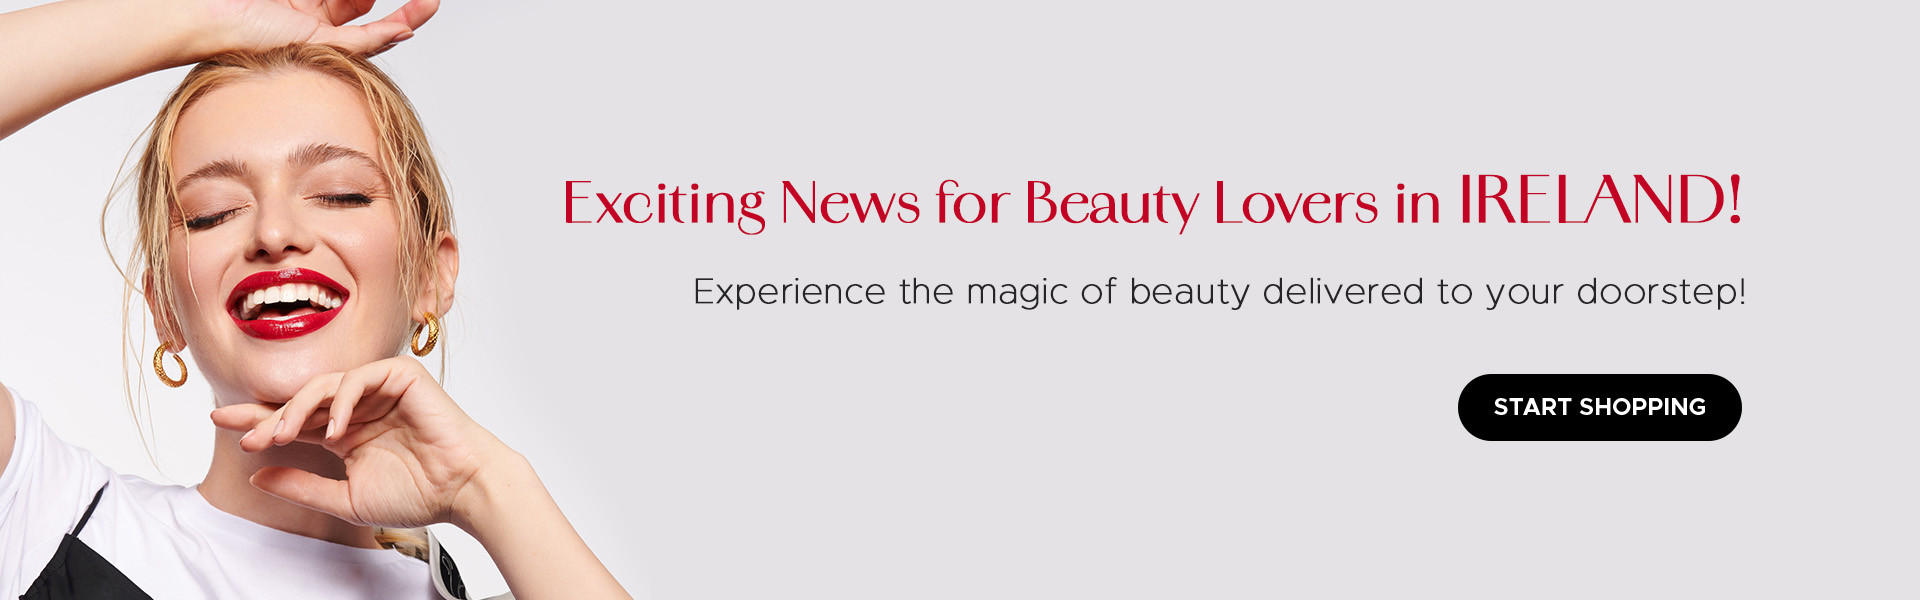 Exciting News for Beauty Lovers in Ireland